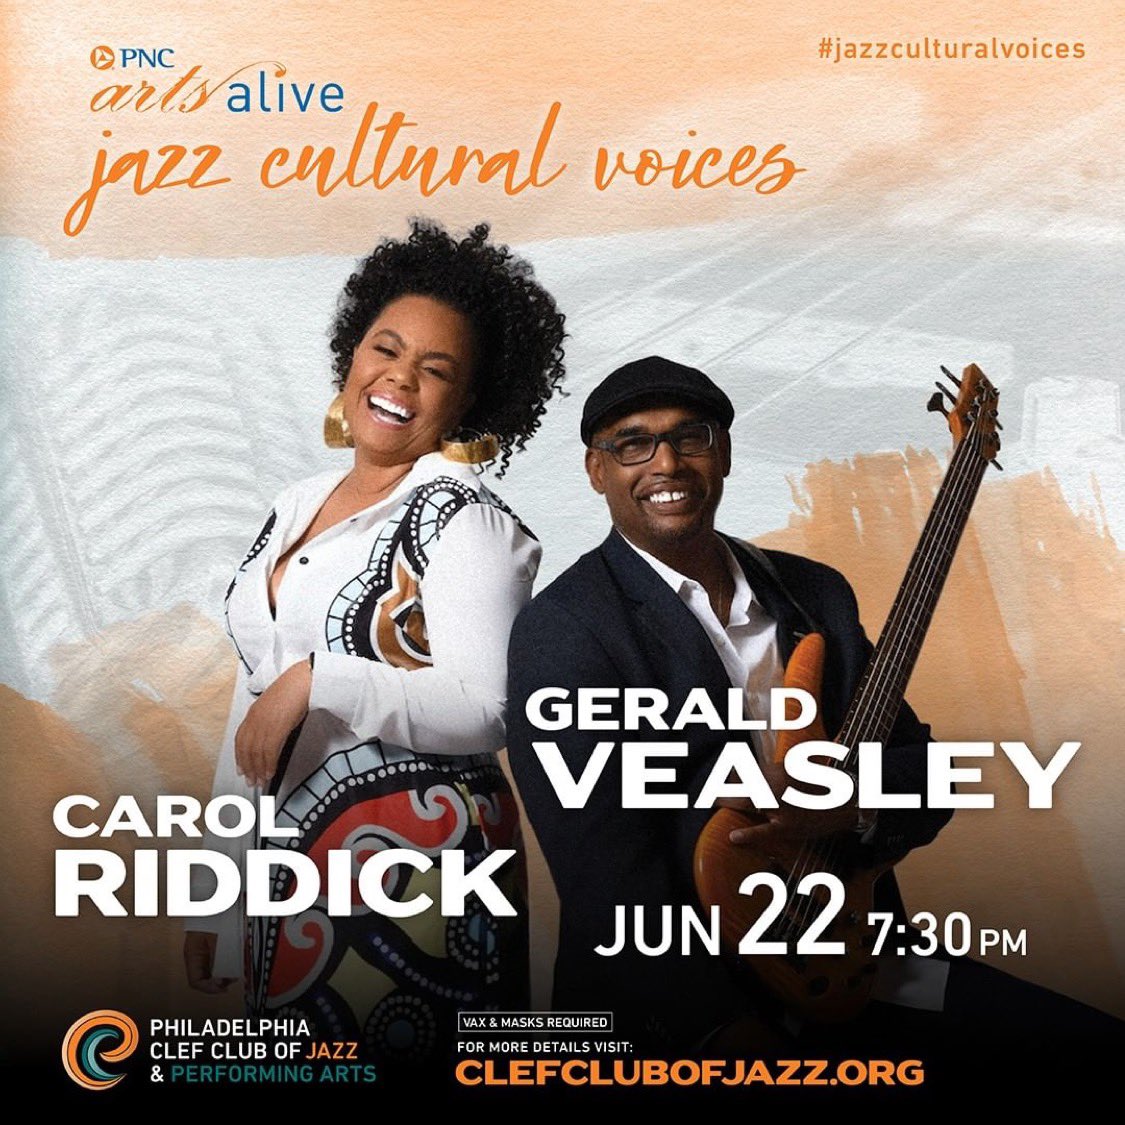 Carol Riddick and Gerald Veasley hit the stage tonight at @ClubClef . For tickets and info, visit clefclubofjazz.org.